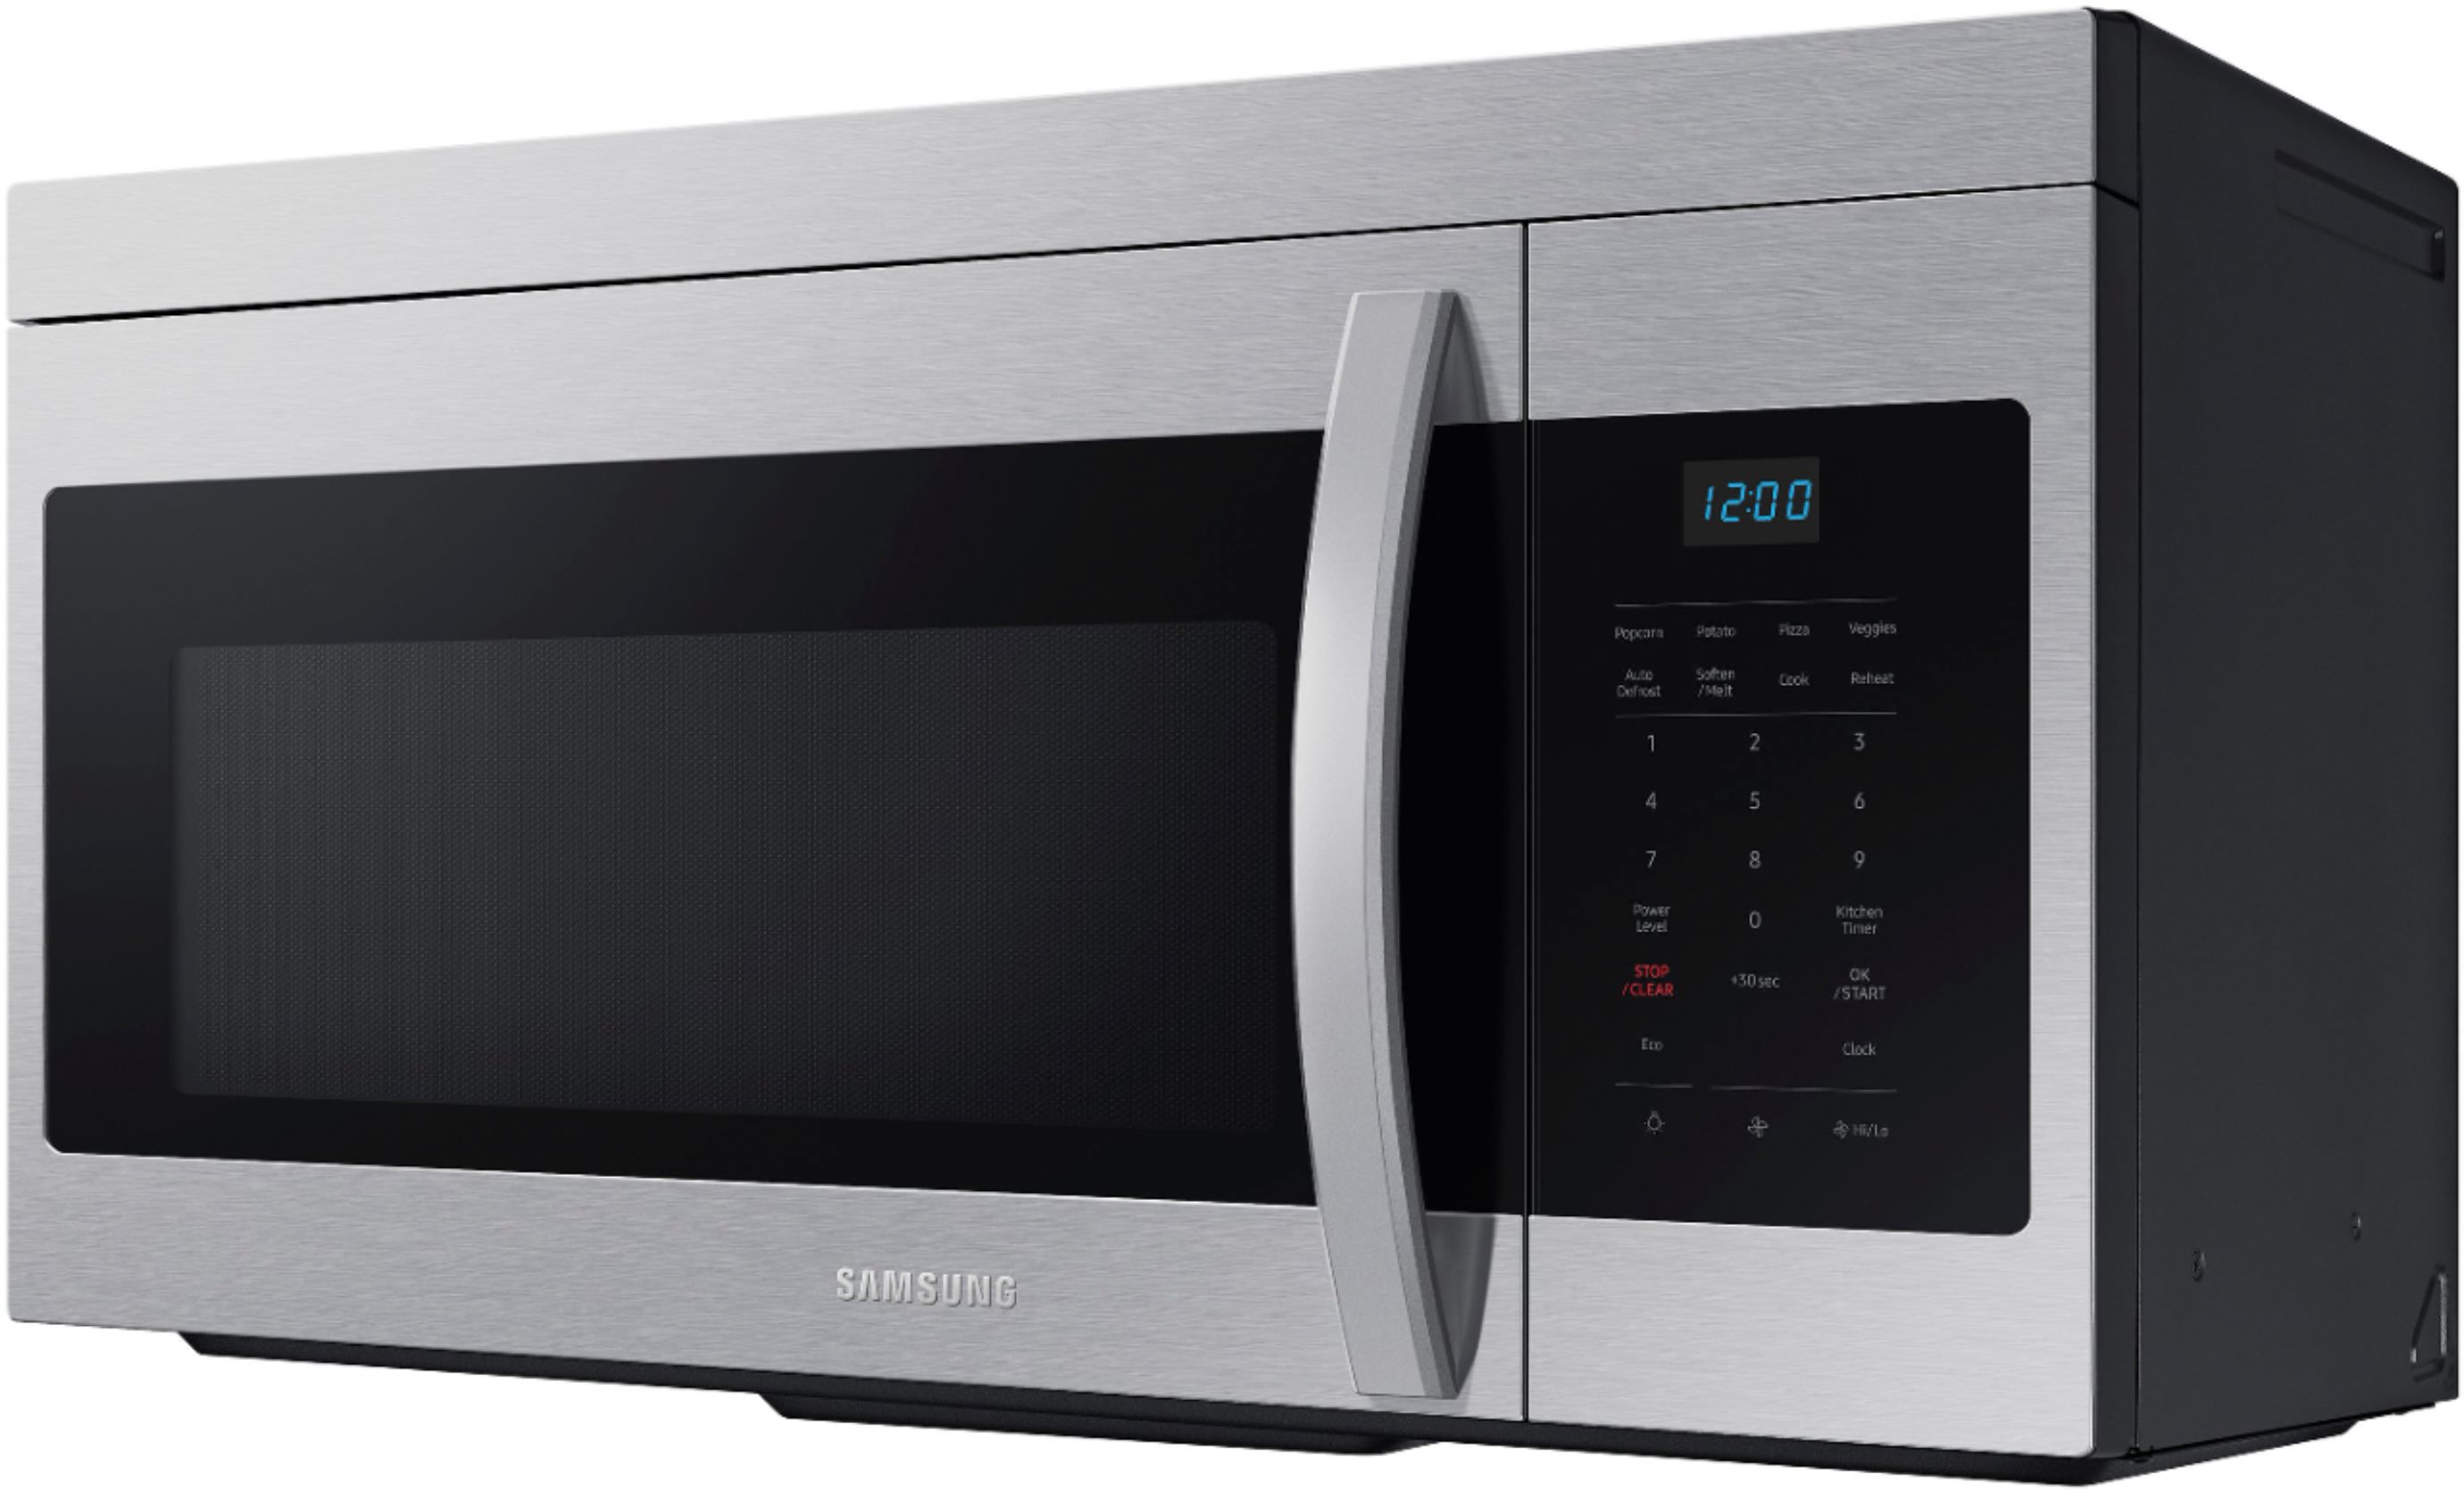 Luipaard levend boksen Samsung 1.6 cu. ft. Over-the-Range Microwave with Auto Cook Stainless steel  ME16A4021AS/AA - Best Buy